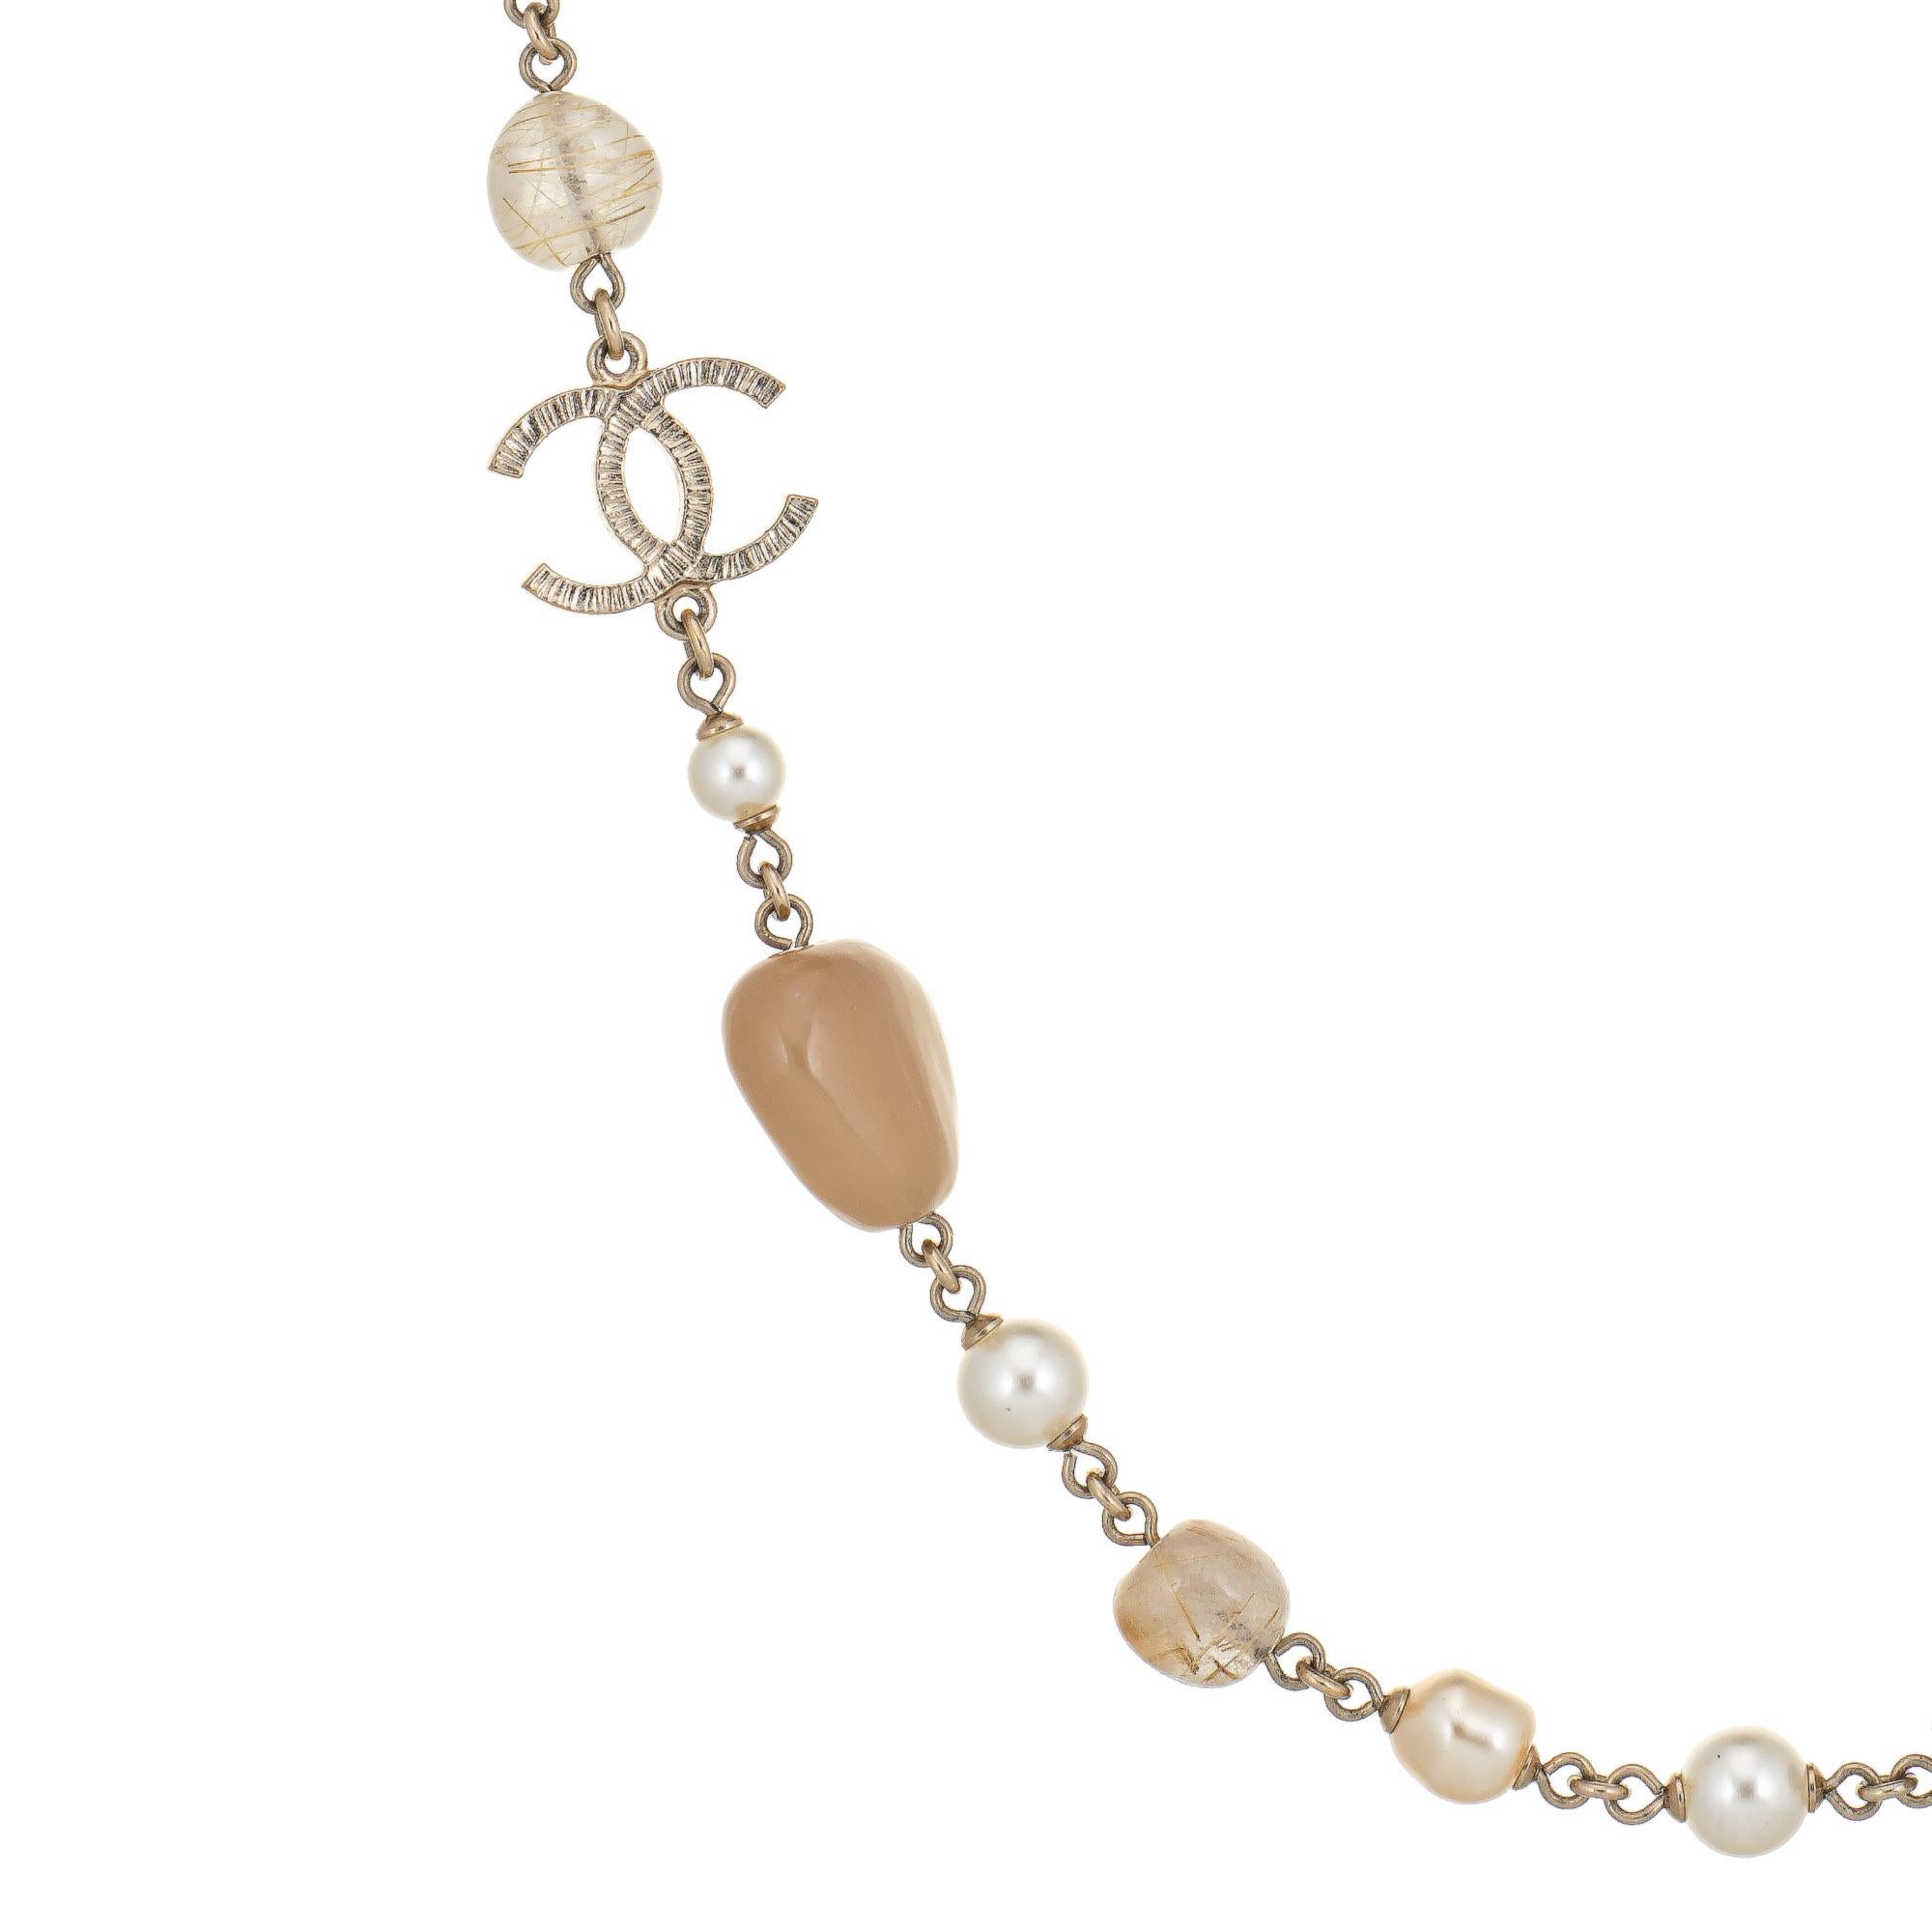 Pre-owned Chanel faux pearl & bead necklace crafted in yellow gold-tone (circa 2014). 

Measuring a long 41 inches, the necklace is comprised of 6mm to 7mm round and baroque faux pearls with 9mm to 12mm resin beads with a clear to sandy color tone.